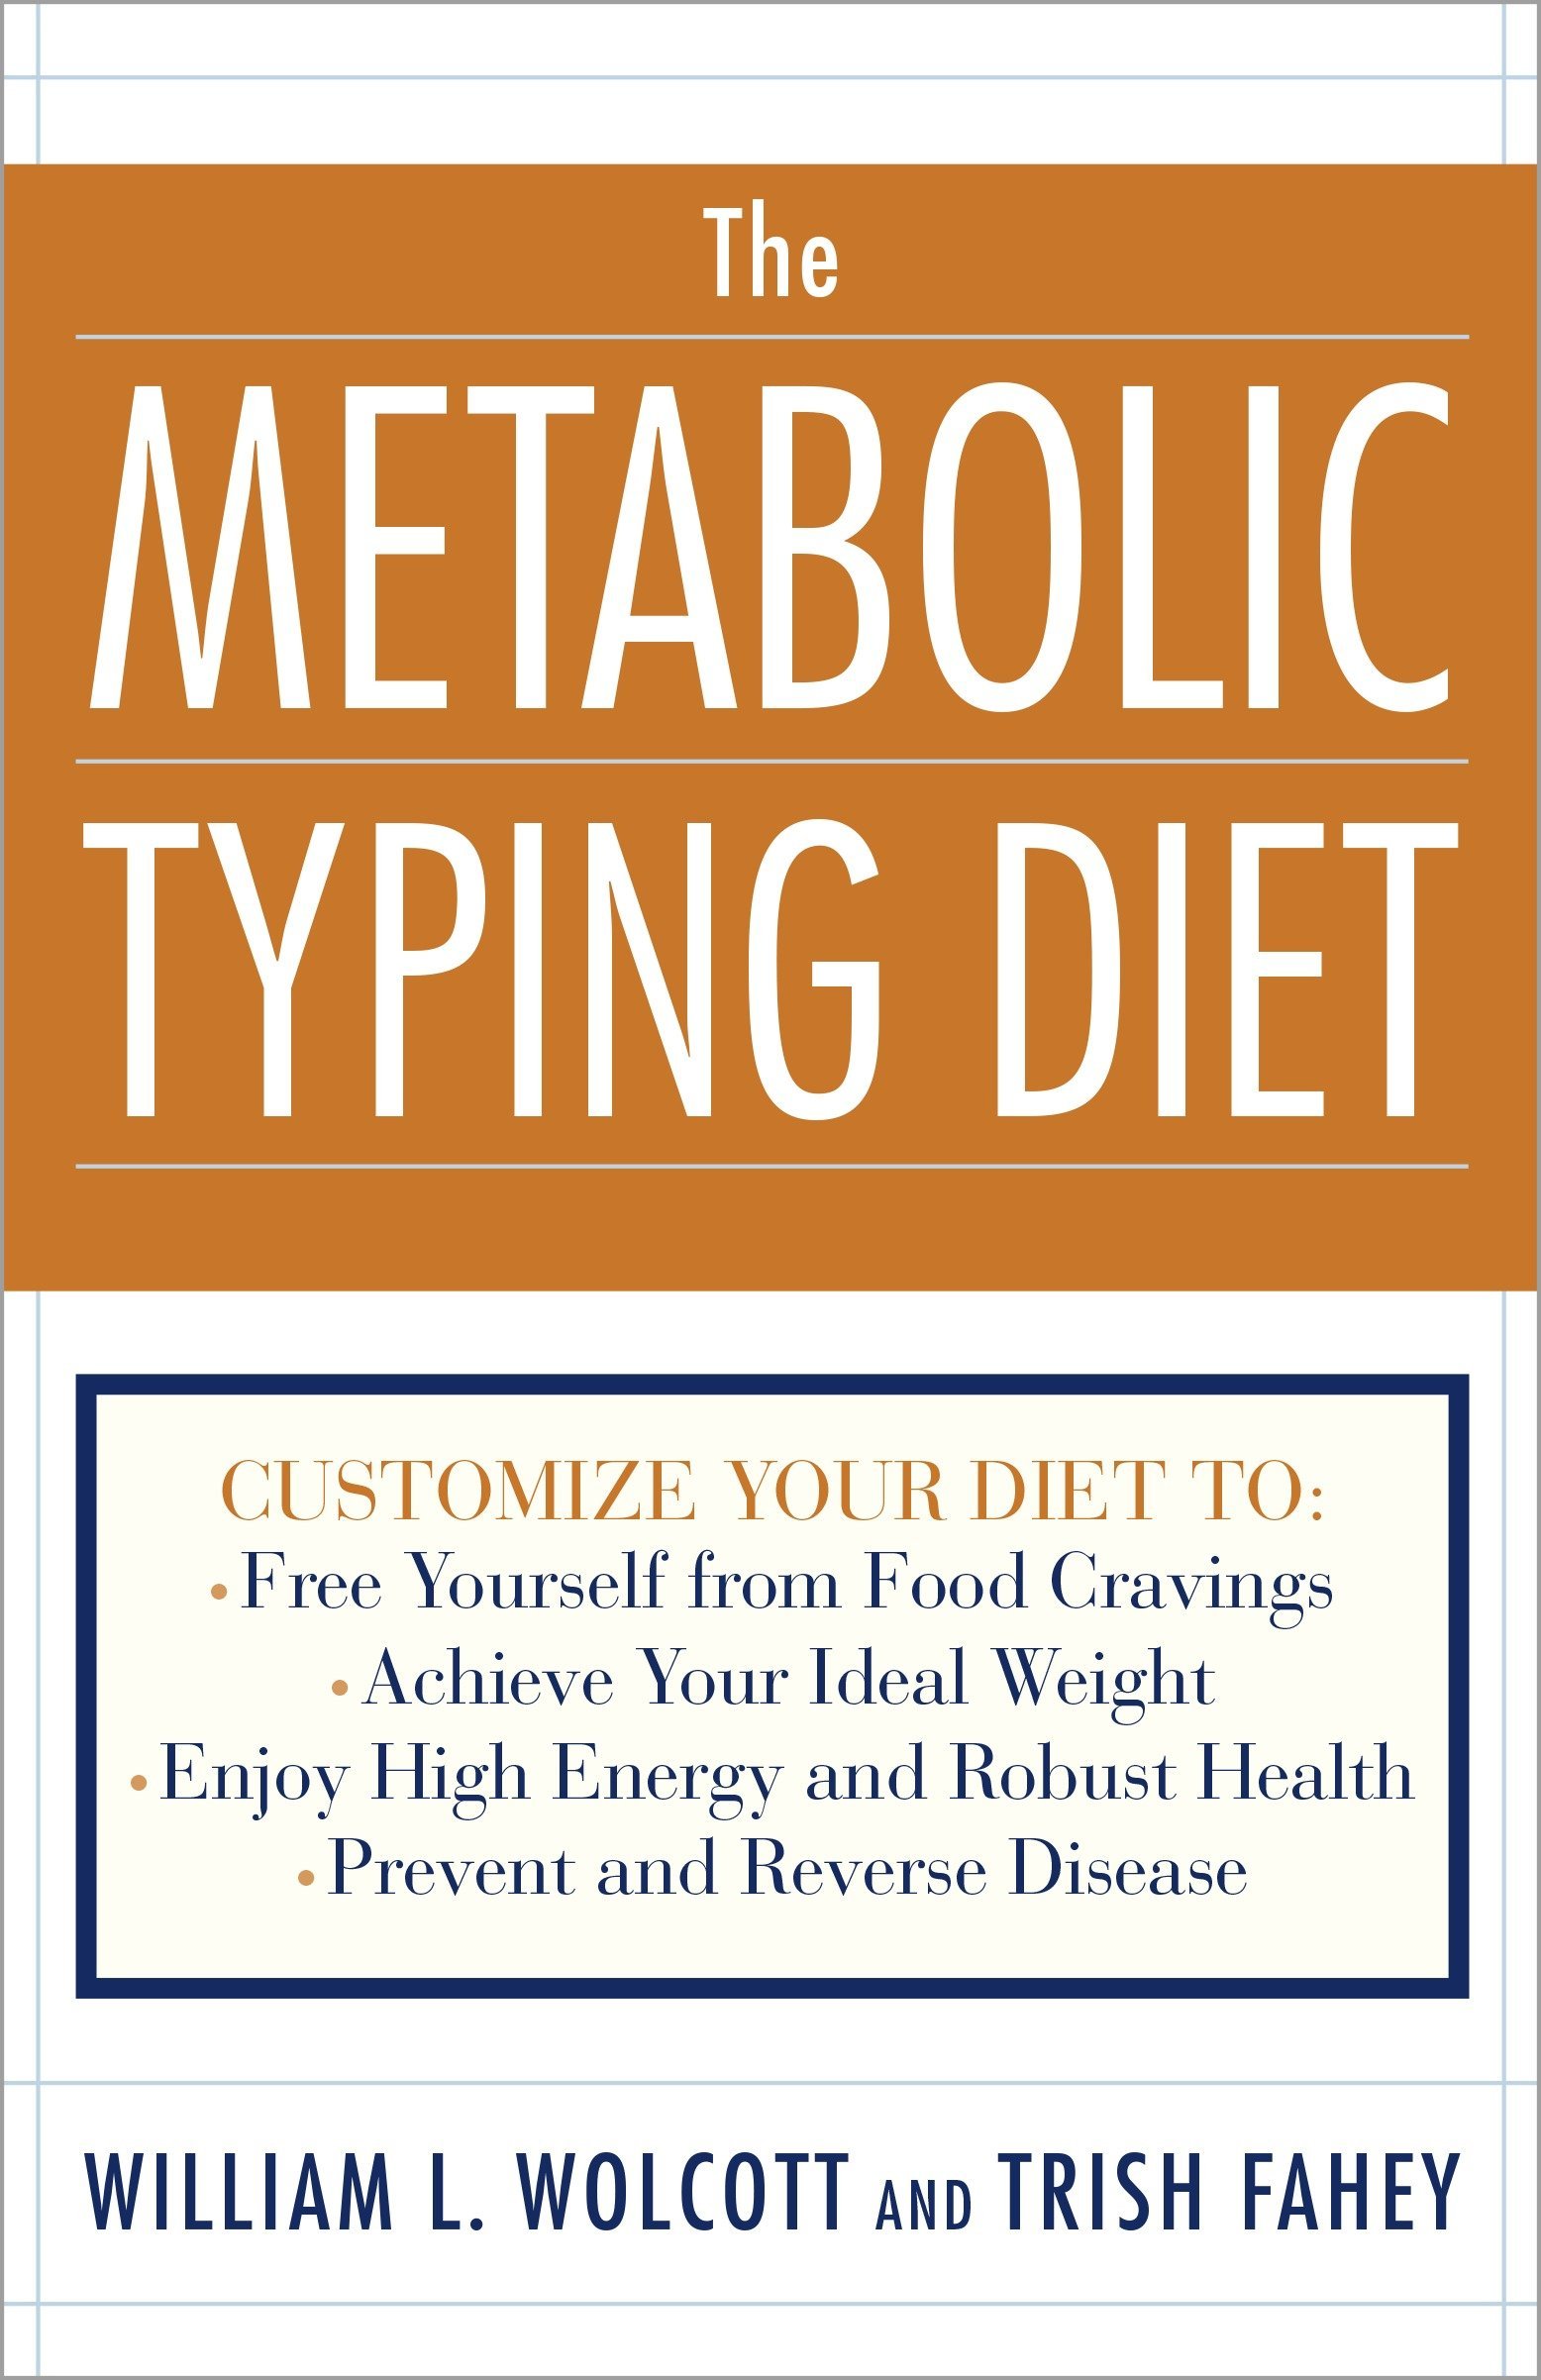 Book Cover The Metabolic Typing Diet: Customize Your Diet To: Free Yourself from Food Cravings: Achieve Your Ideal Weight; Enjoy High Energy and Robust Health; Prevent and Reverse Disease